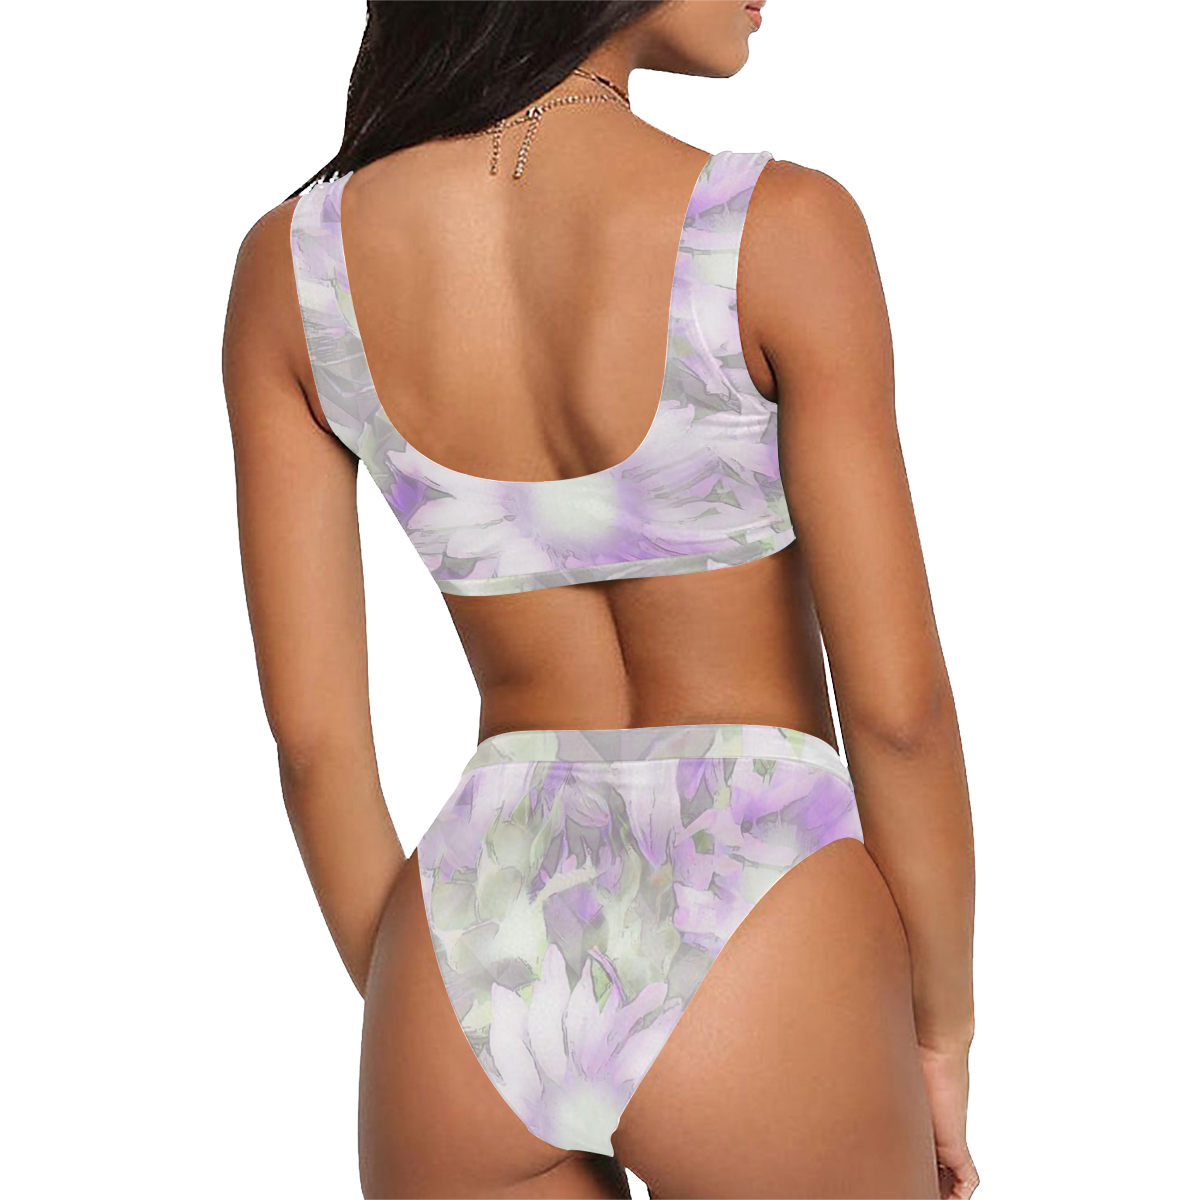 Romantic pastel floral,lilac by JamColors Sport Top & High-Waisted Bikini Swimsuit (Model S07)